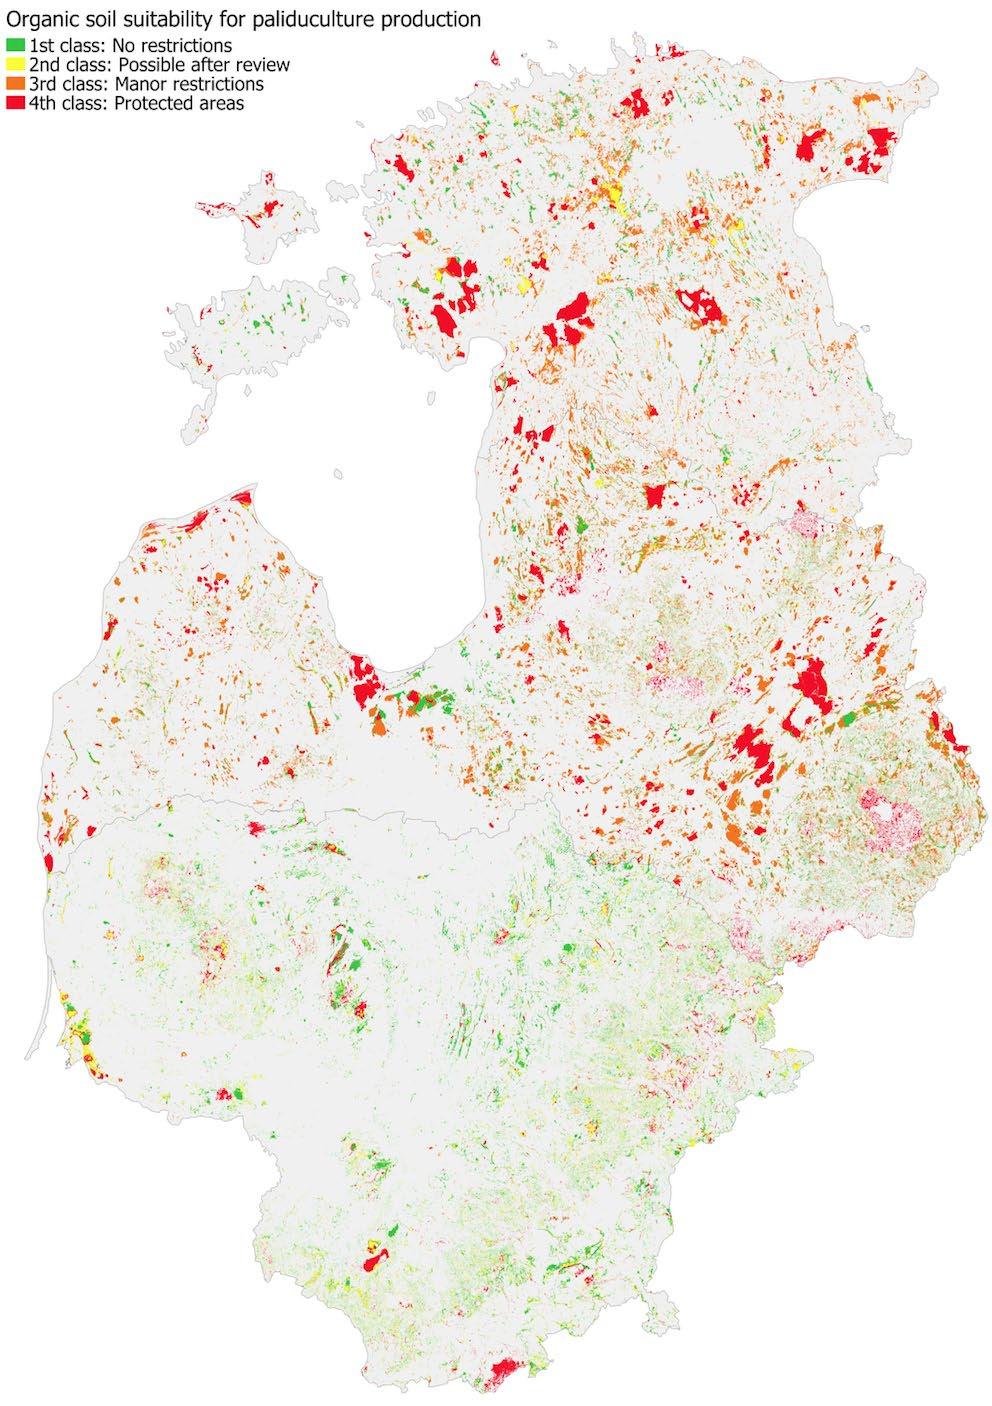 Potential areas for paludicultures in Baltics